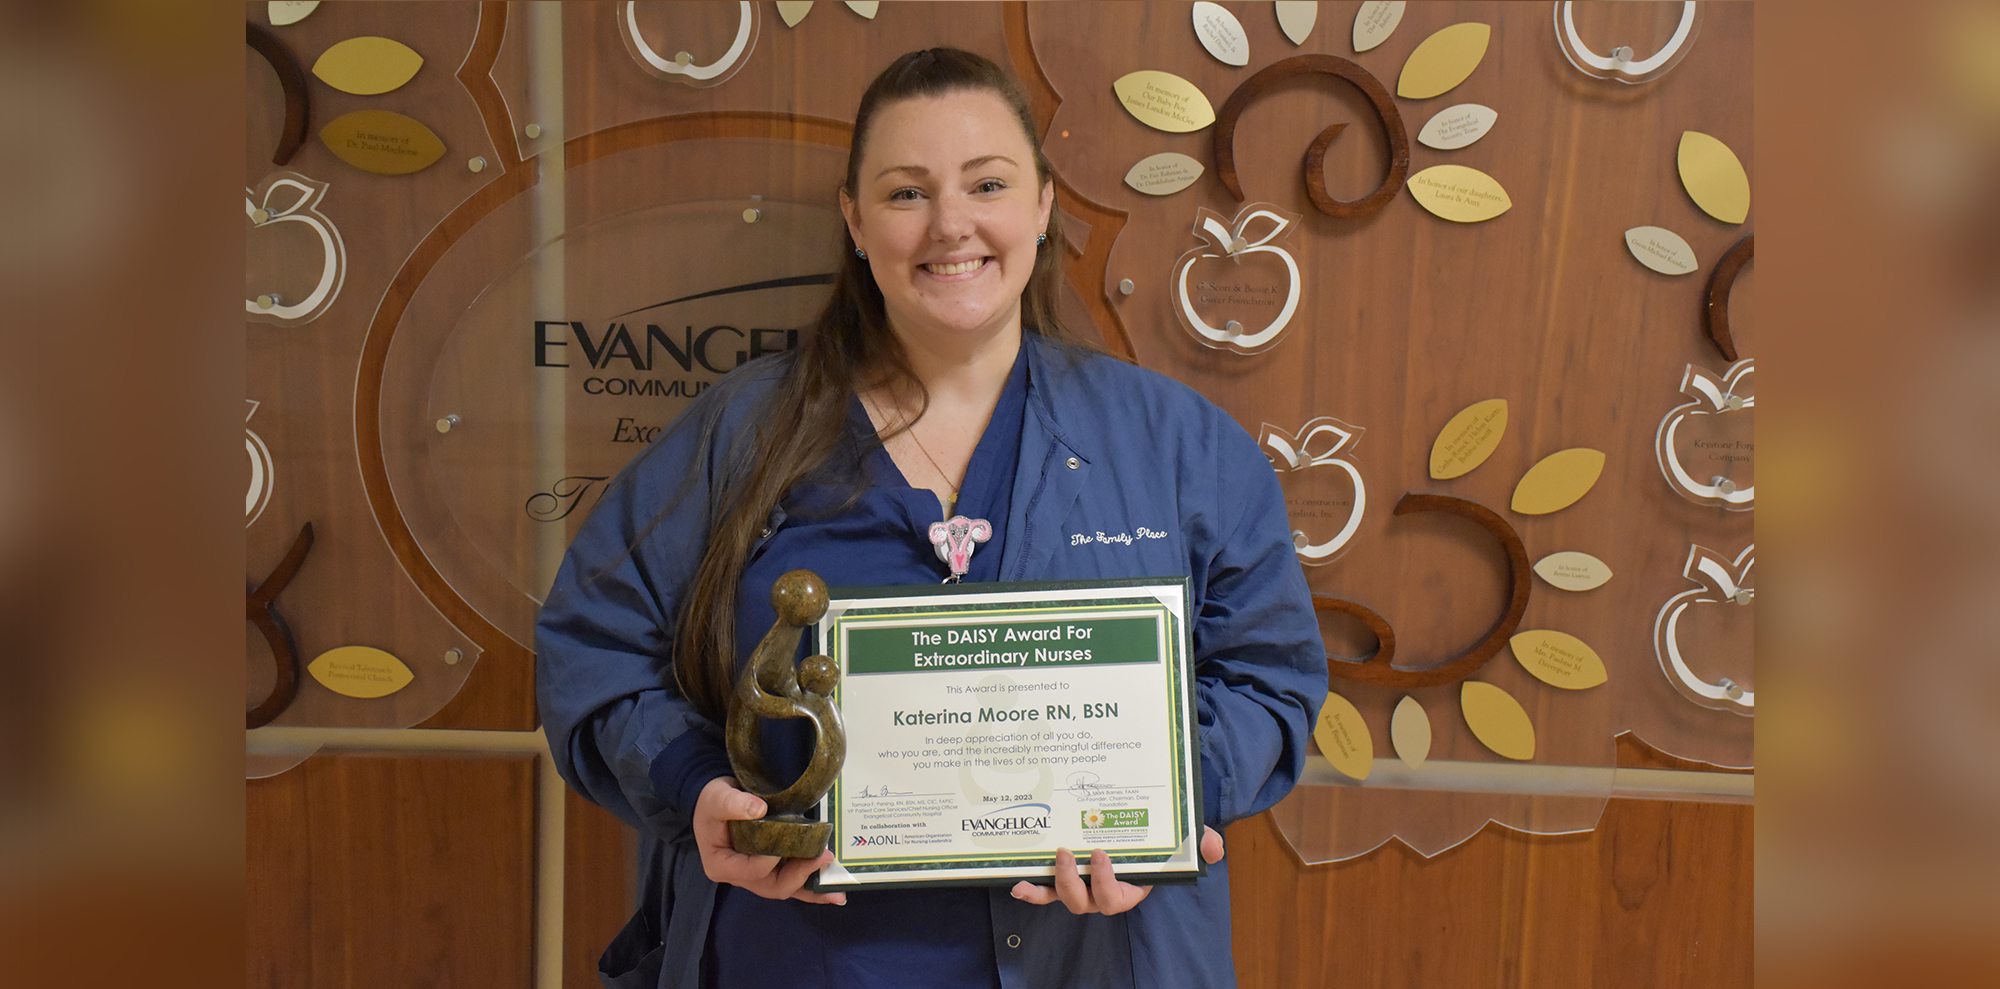 Evangelical Community Hospital Awards DAISY Honor for Nursing Excellence to Katerina Moore RN, BSN